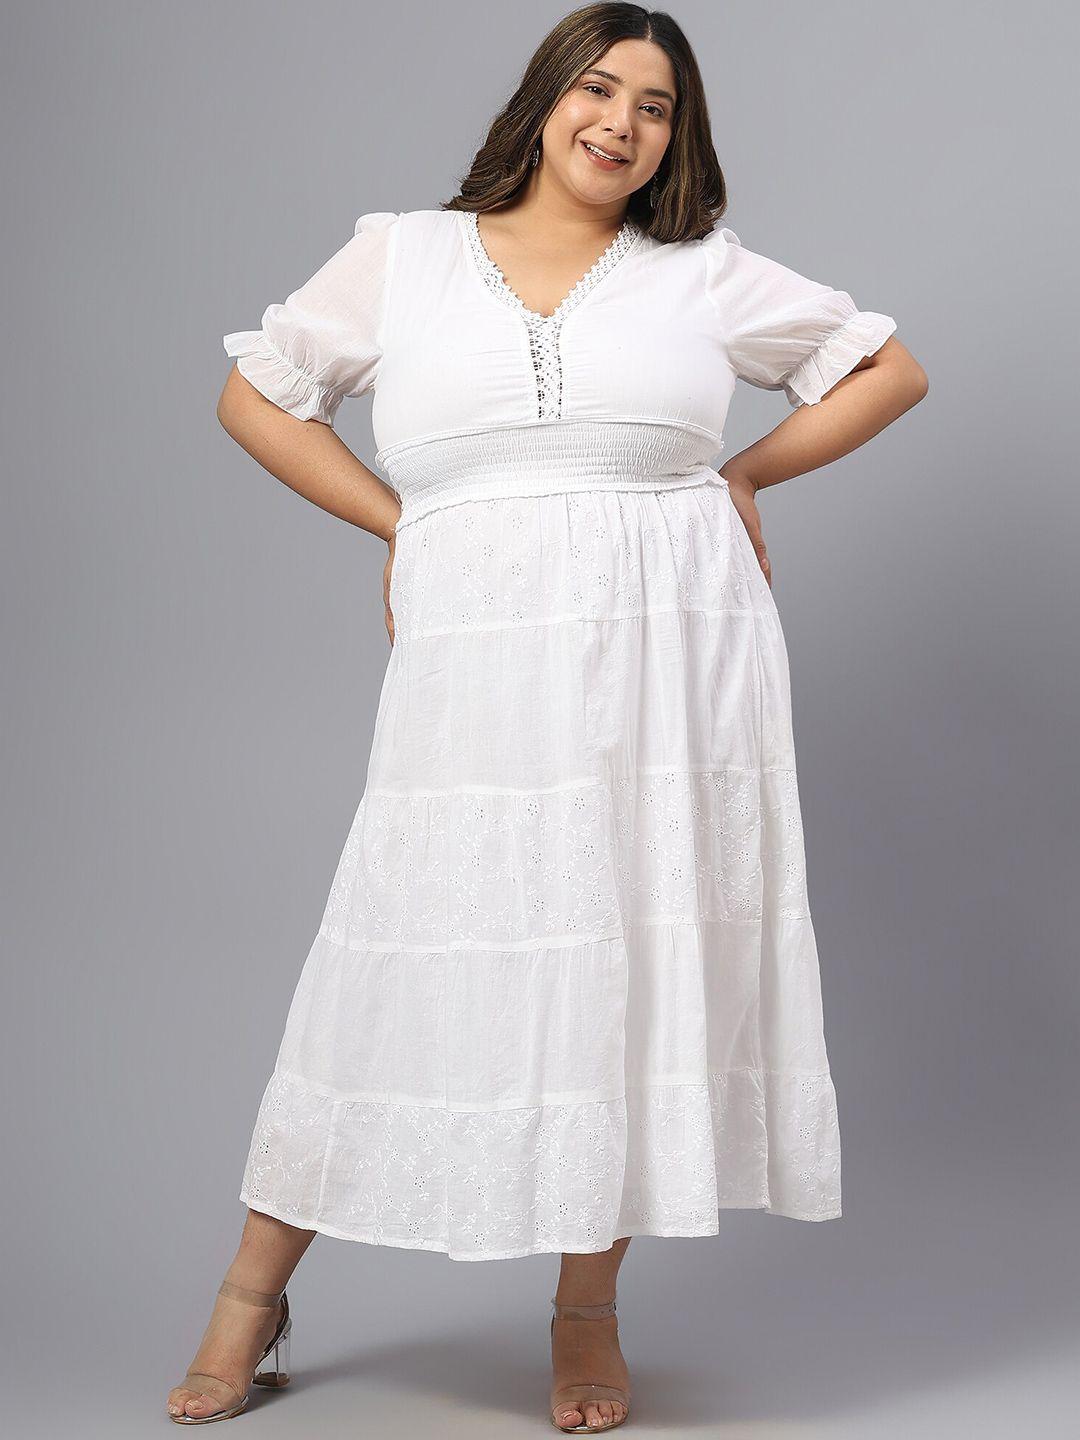 saakaa plus size floral embroidered v-neck bell sleeves schiffli pure cotton midi dress